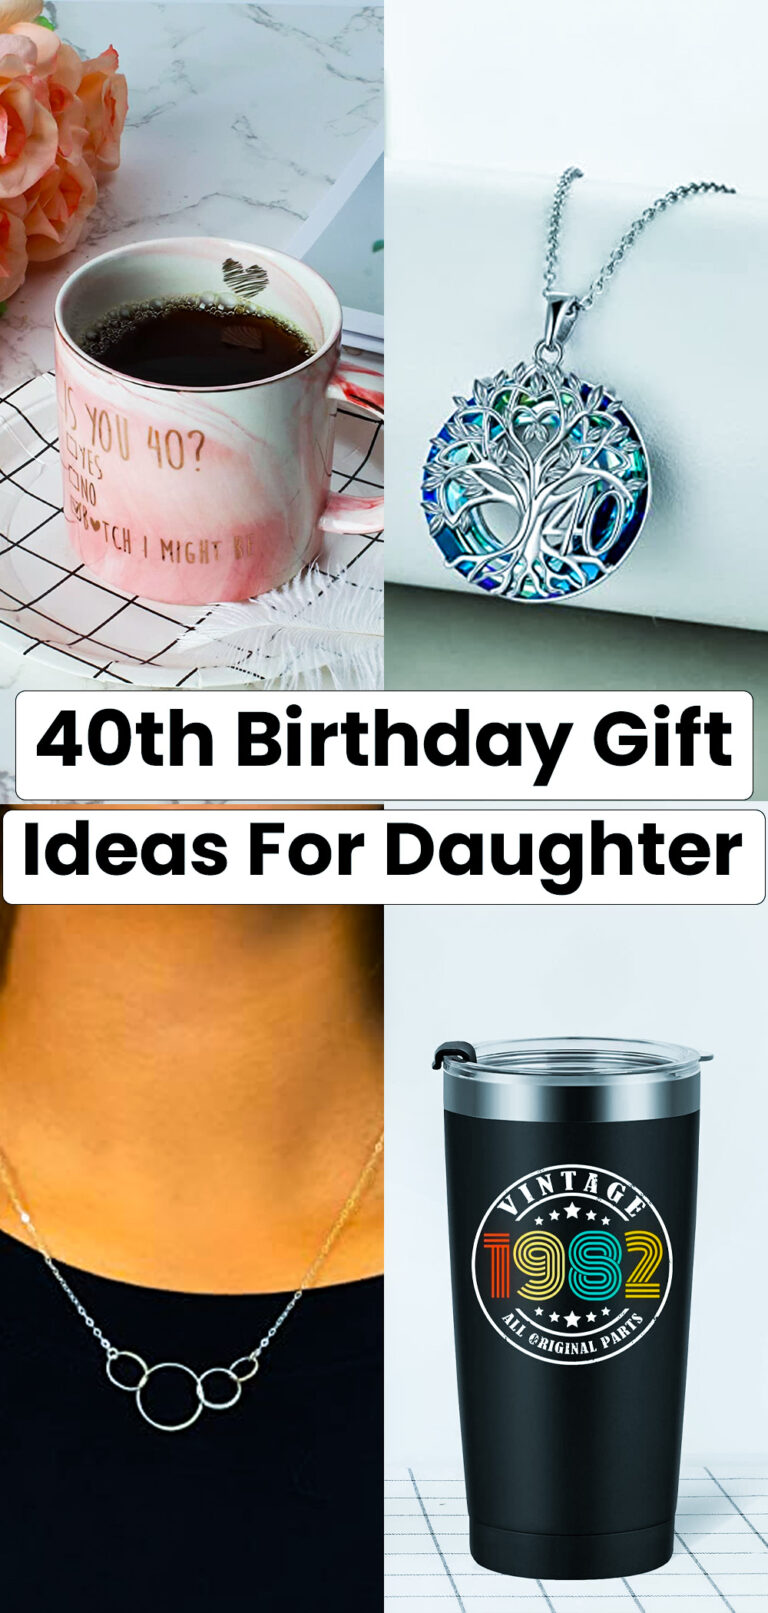 40th Birthday Gift Ideas for Daughter